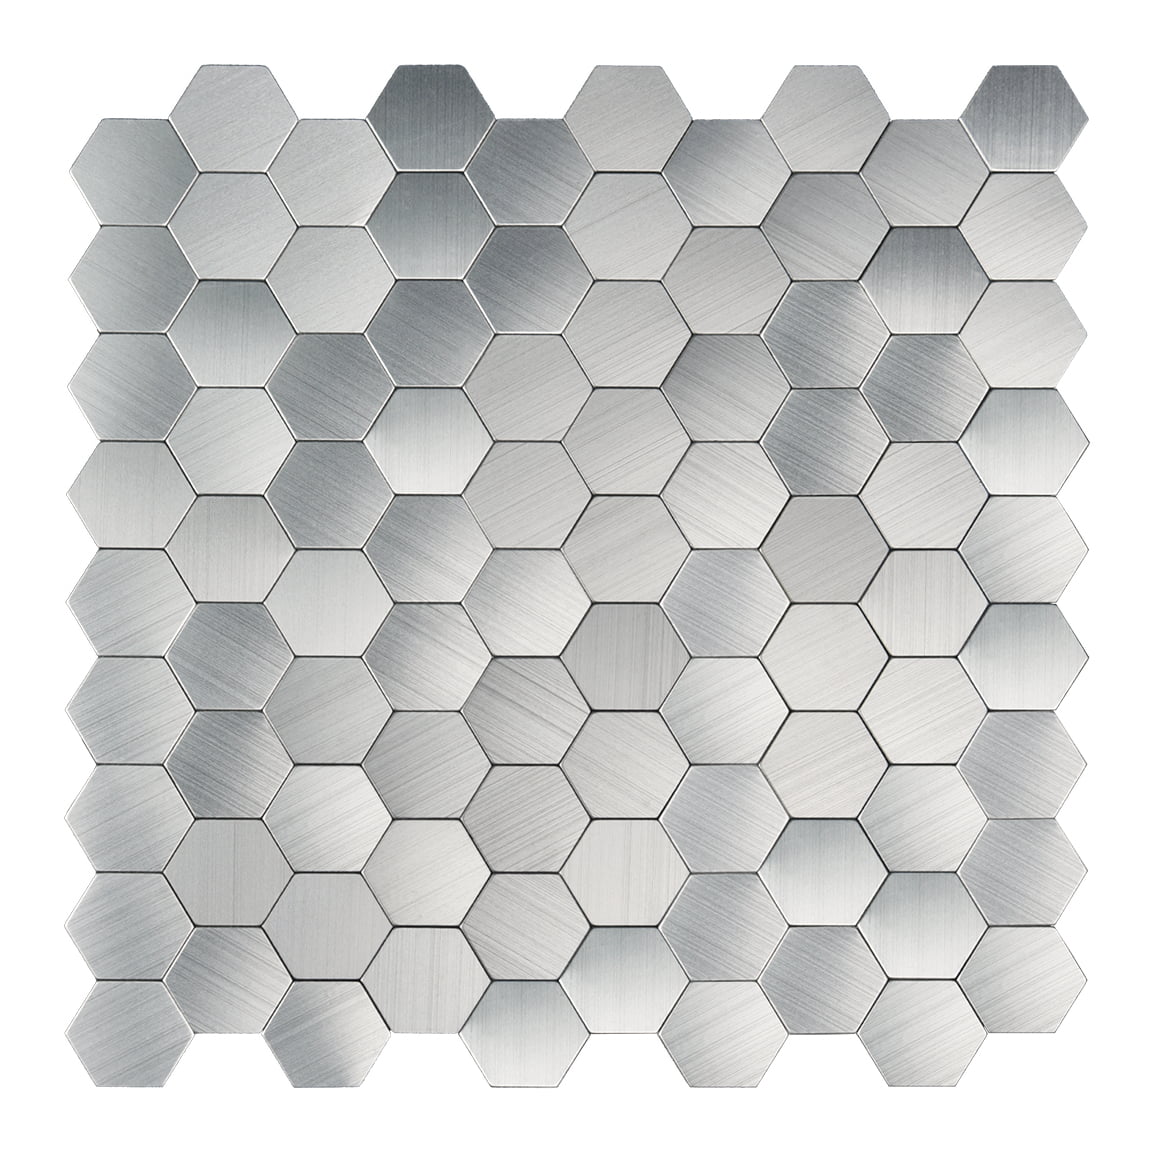 Art3d 11.8 in. x 11.8 in. Stainless Steel in Triangle Silver Self-Adhesive Tile Metal Peel and Stick Tile (9.6 Sq. ft./Box), Stainless Steel Silver 5